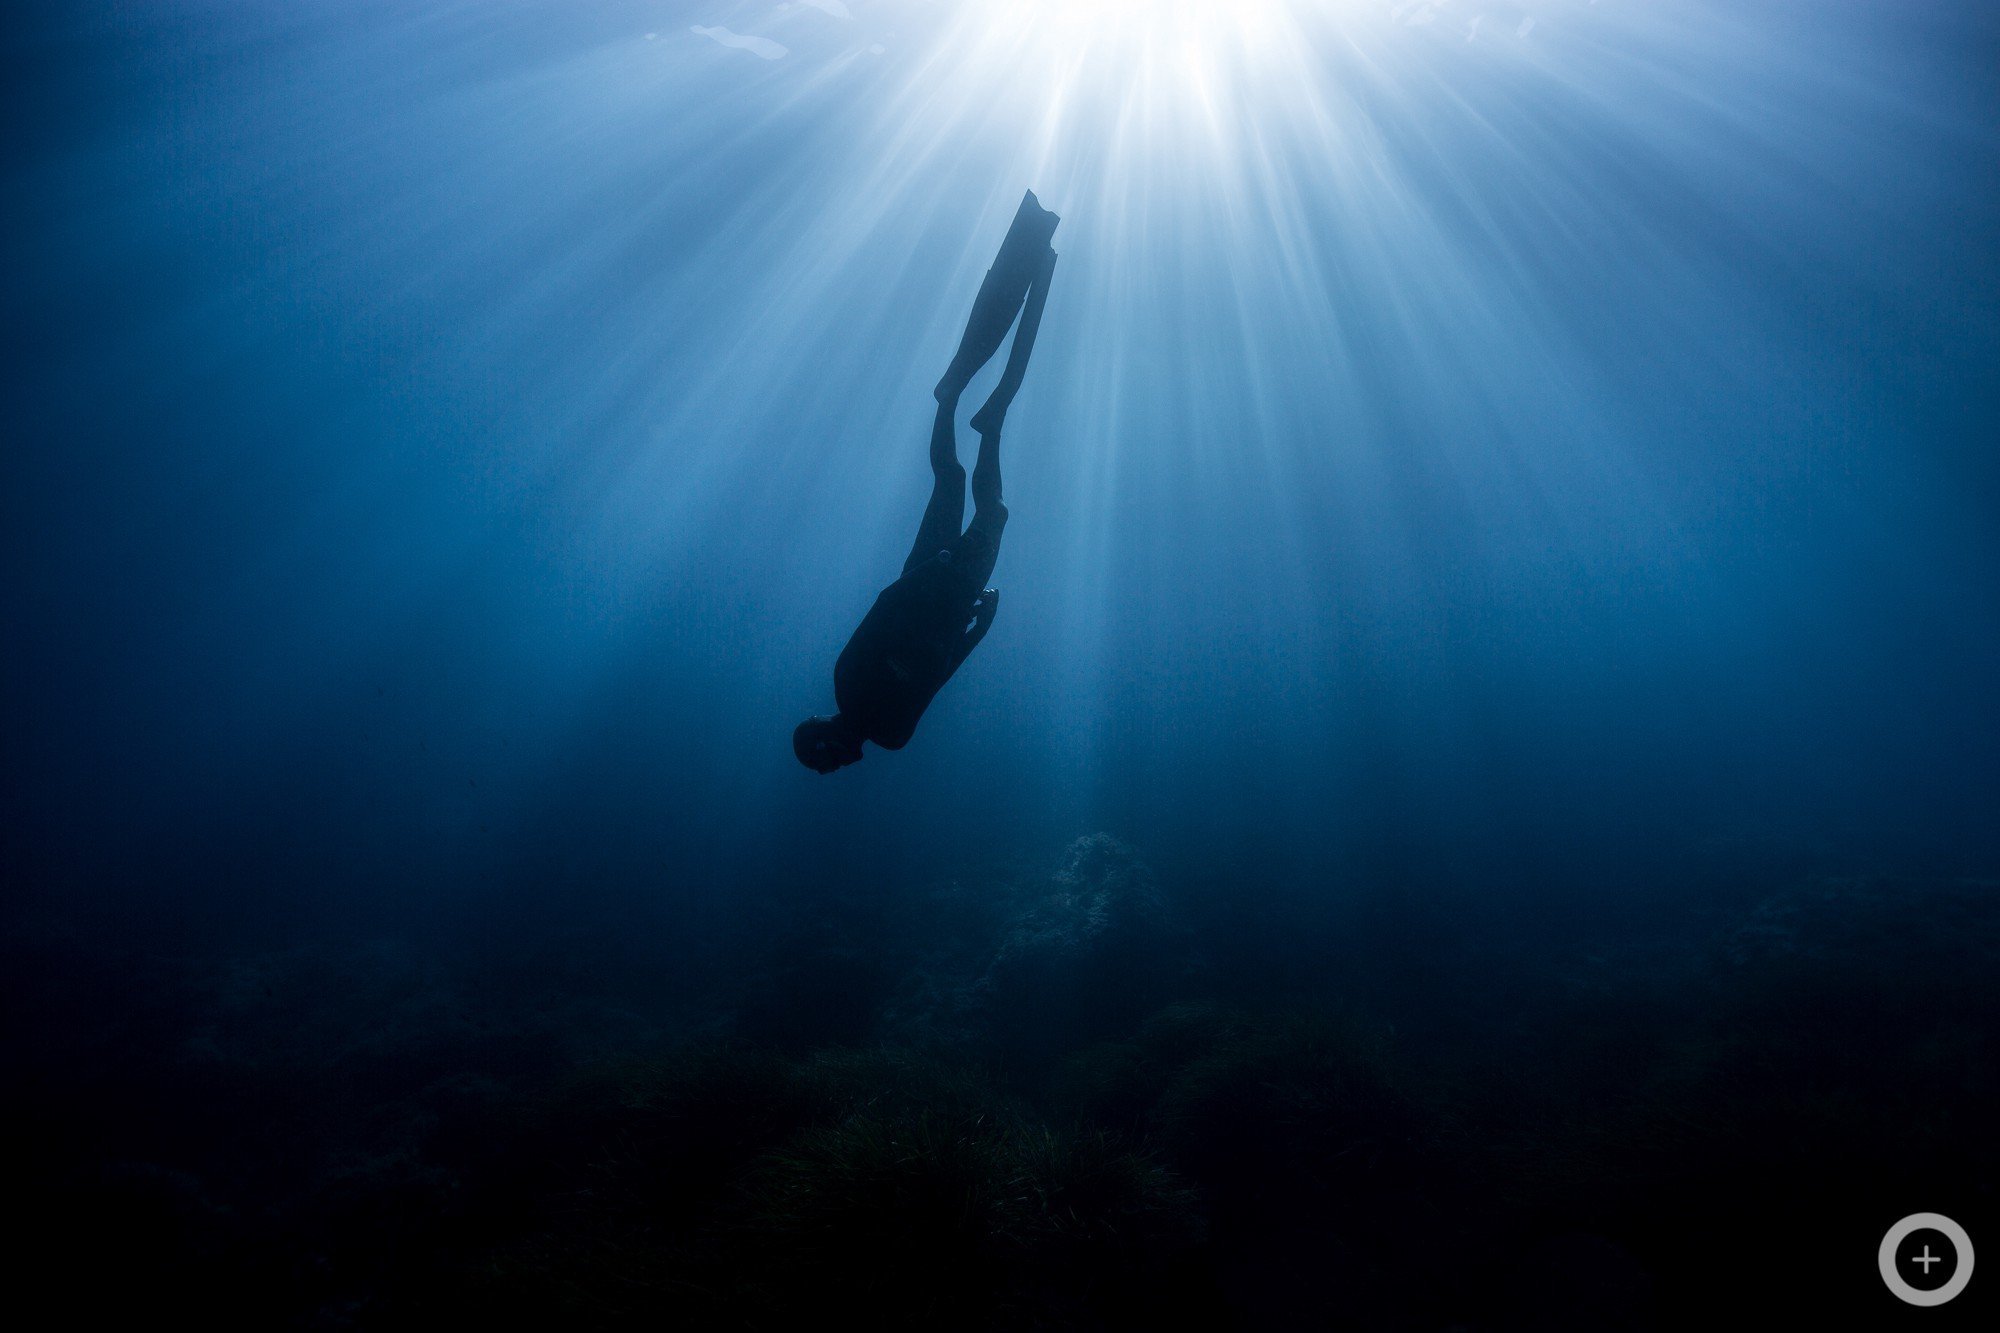 "How would you describe the feeling of being deep in the ocean without...